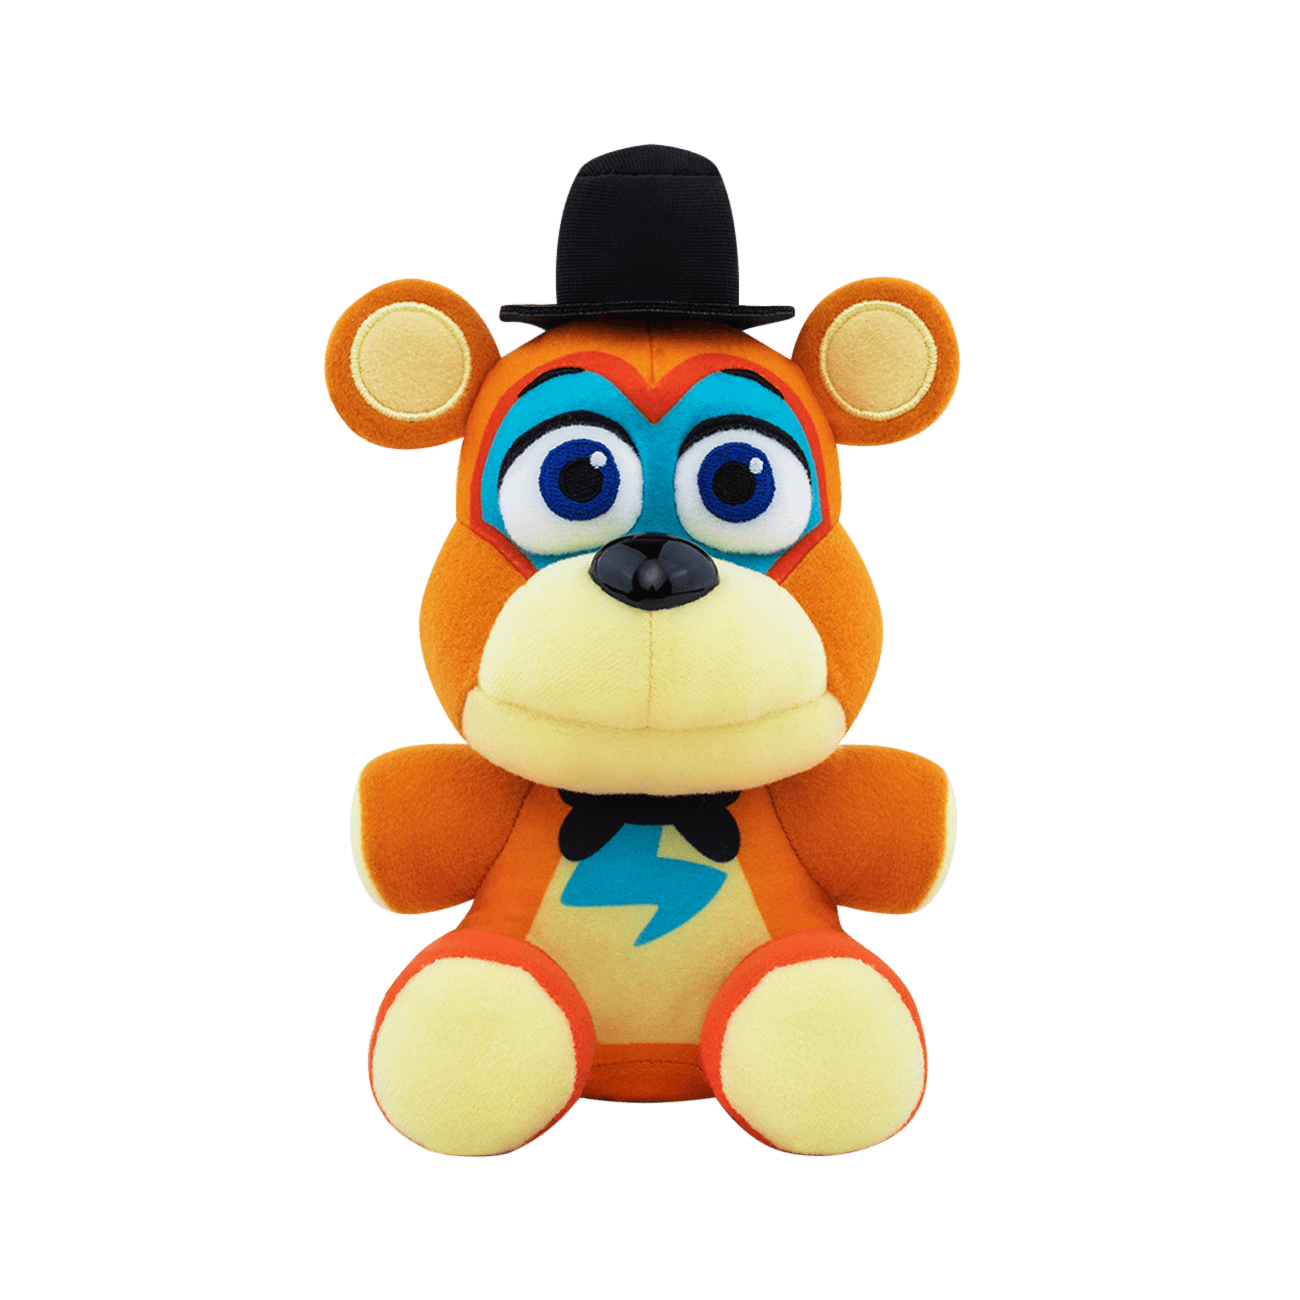 2020 Golden Freddy Exclusive Five Nights at Freddys Plush 7 Toy  ZHE DE 